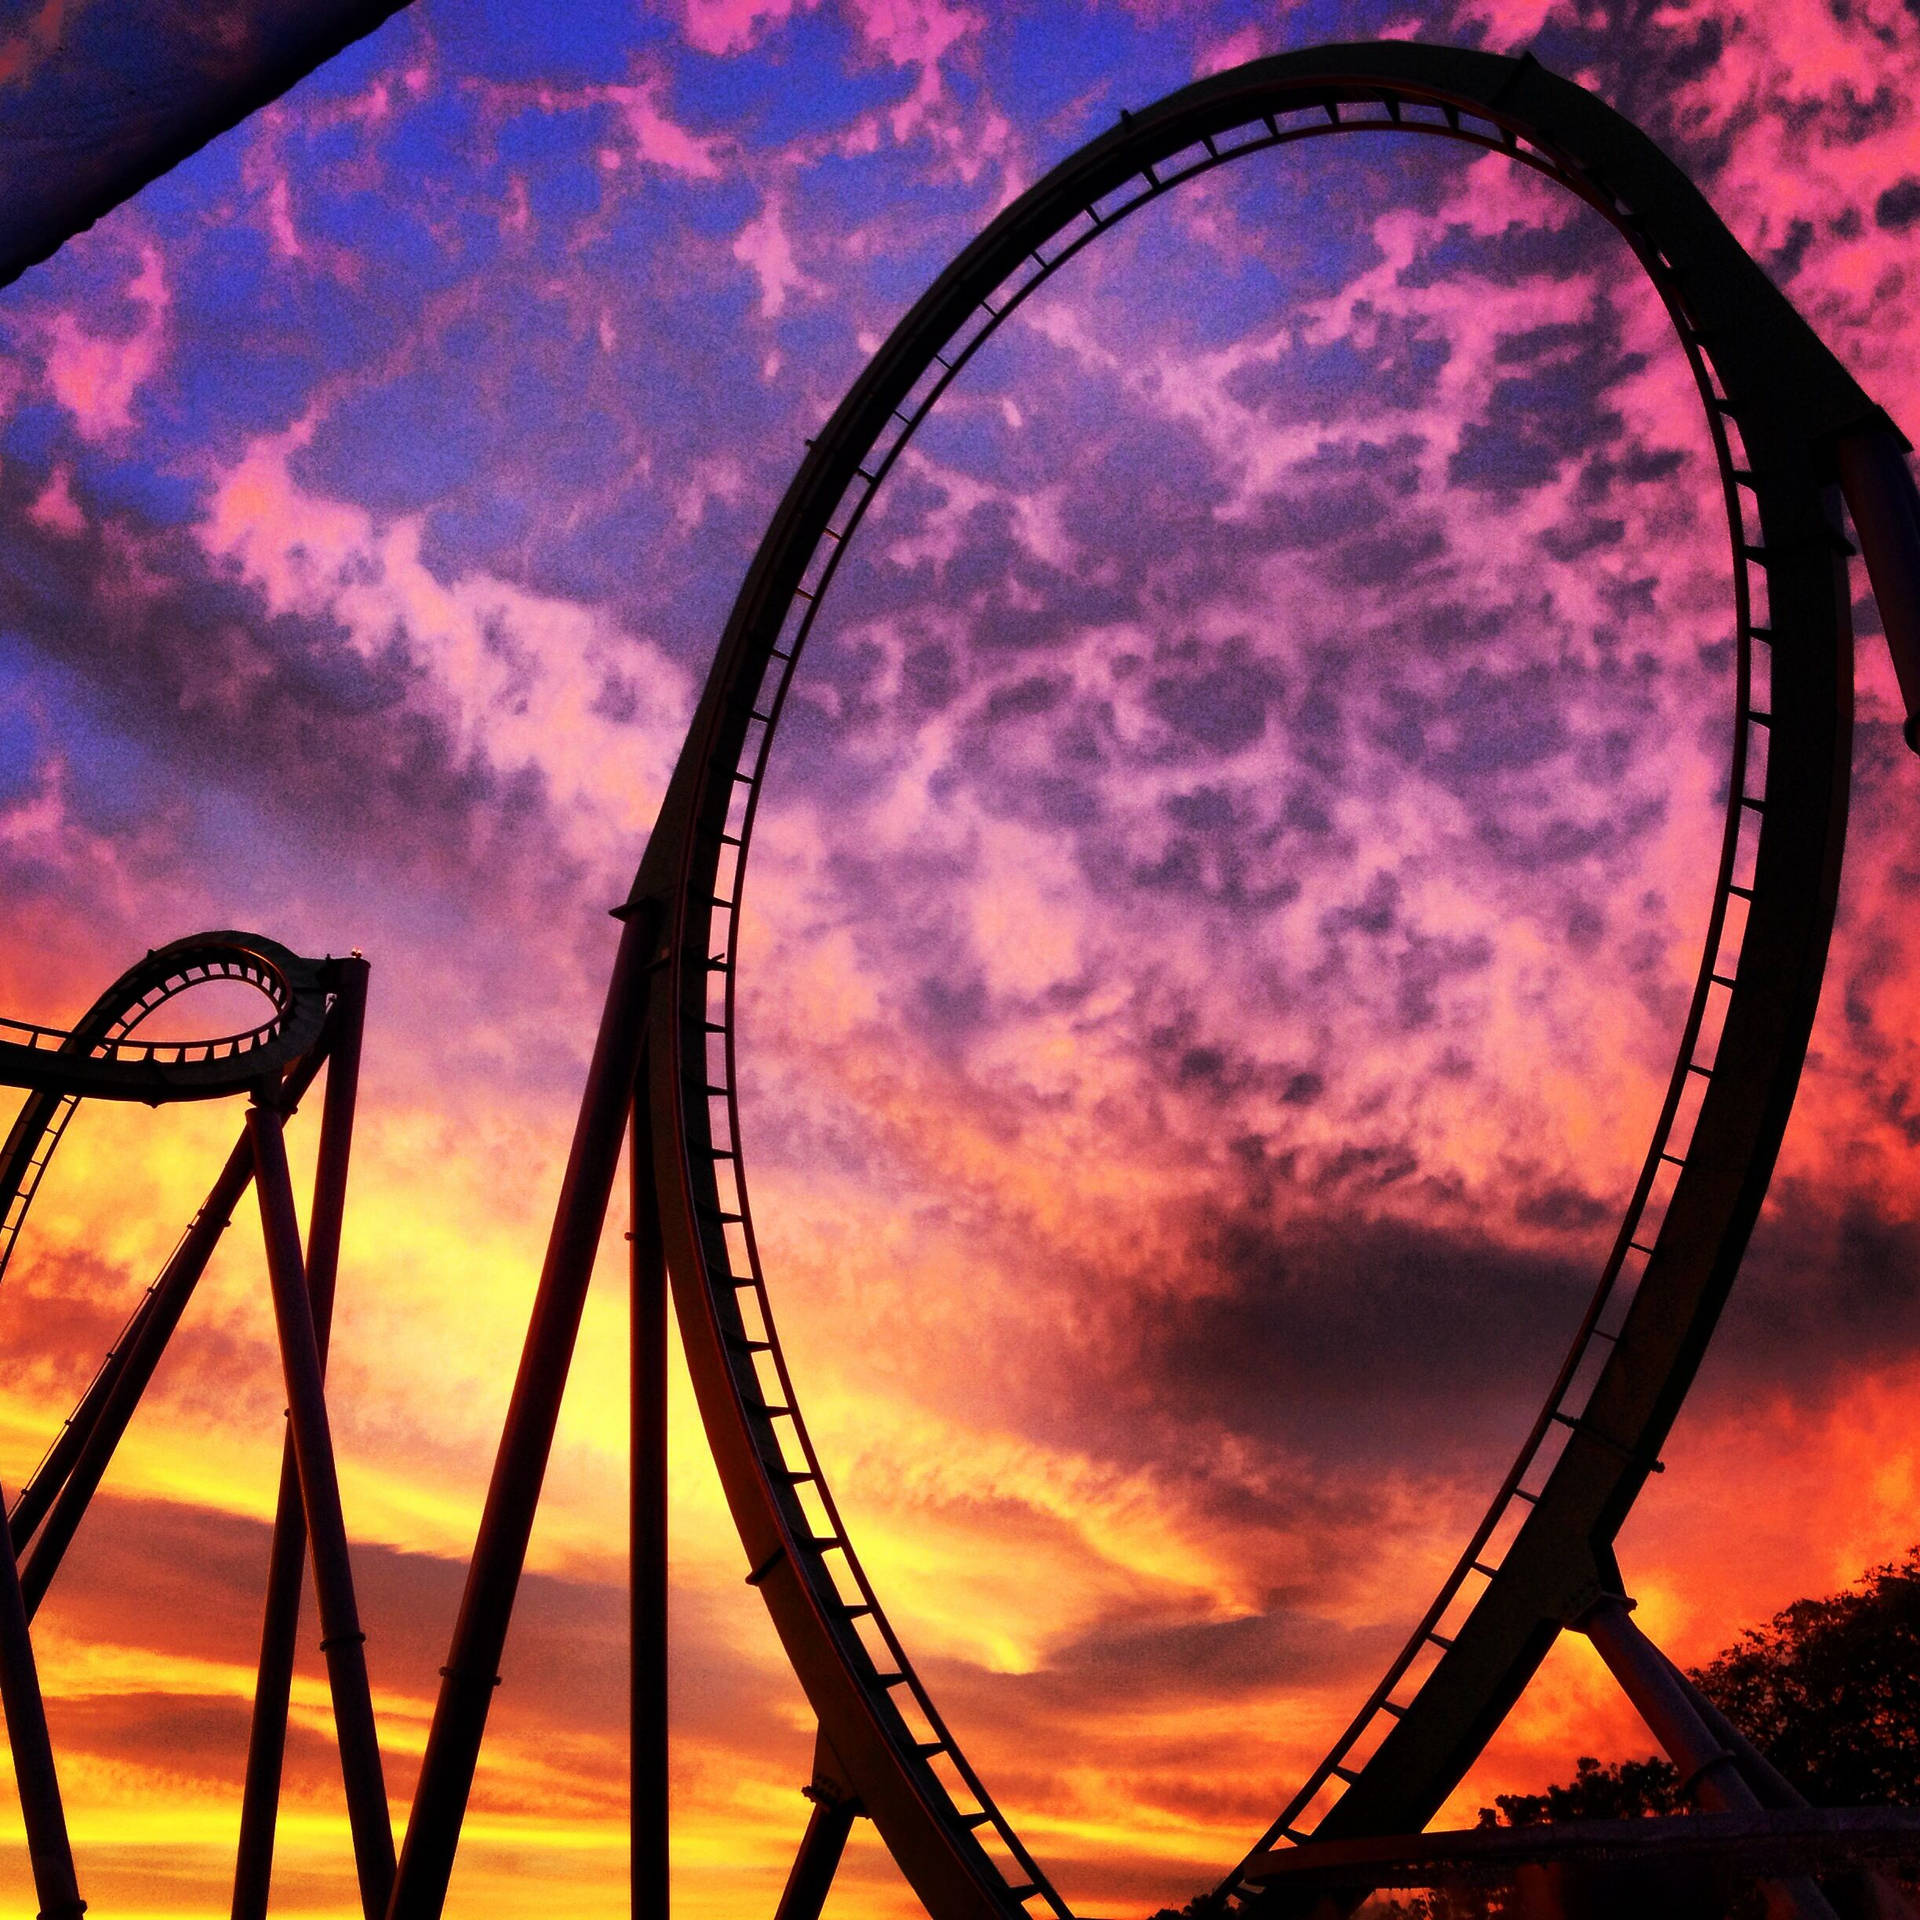 High-flying Thrill On A Roller Coaster Amidst Vibrant Sunset Background